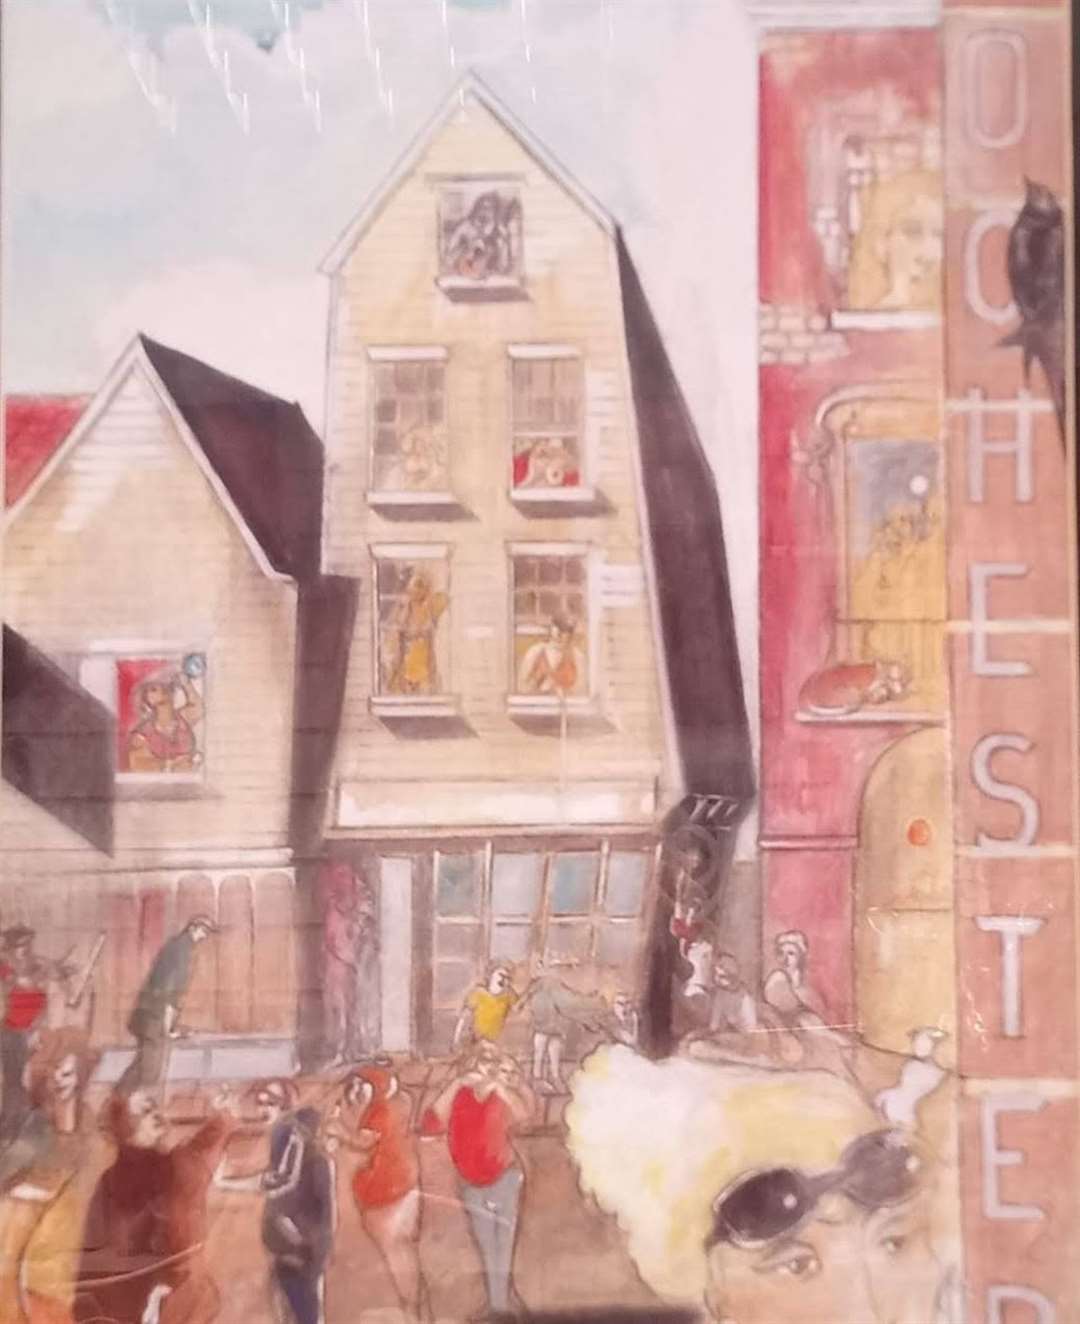 A painting of how the shop looked when it was a brothel